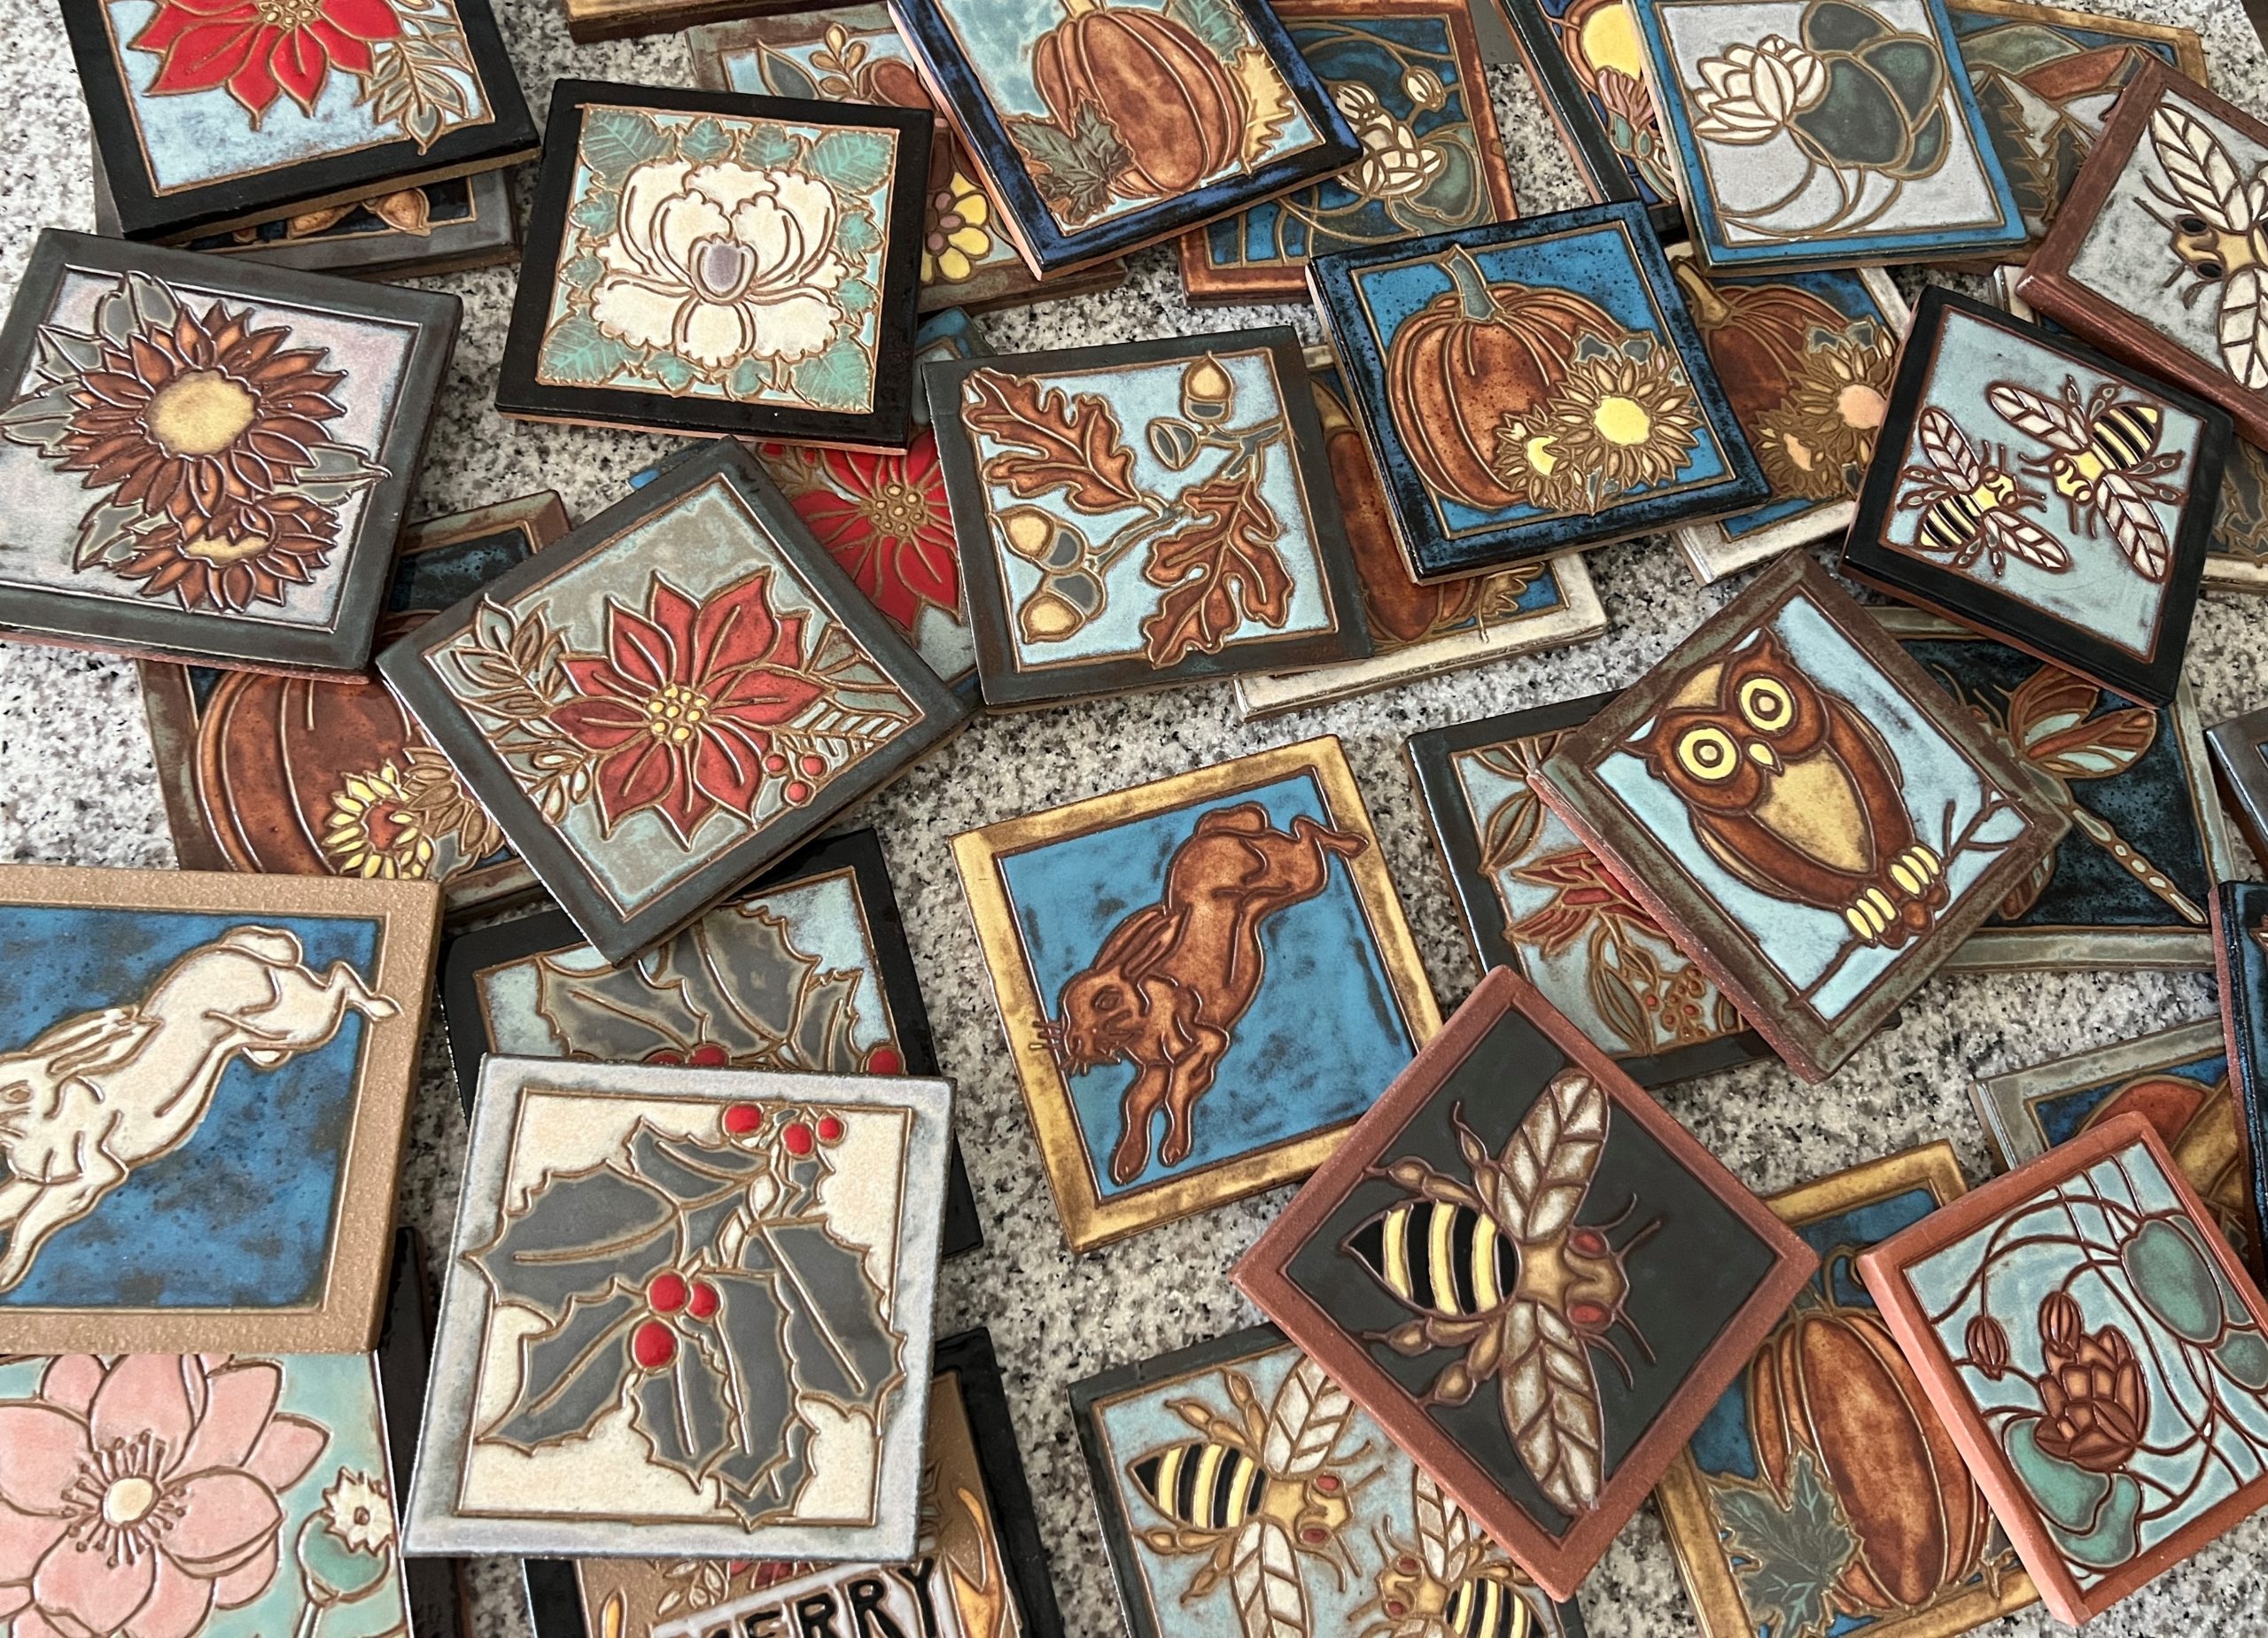 North Carolina made ceramic tiles are traditional presentations to winners at Longleaf Film Festival